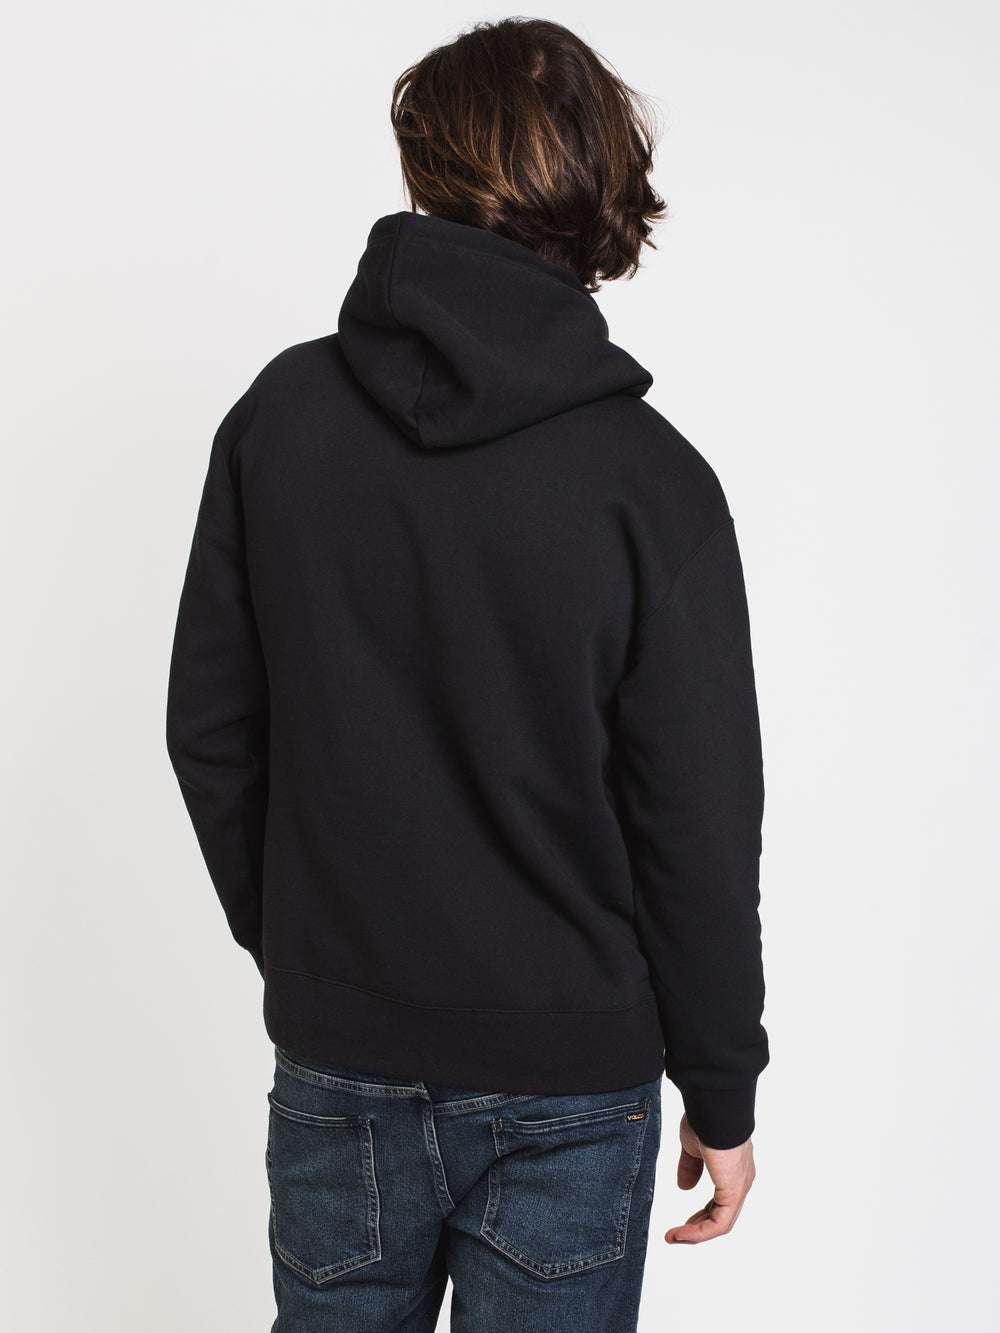 NIKE SB STRIPES PULLOVER HOODIE  - CLEARANCE